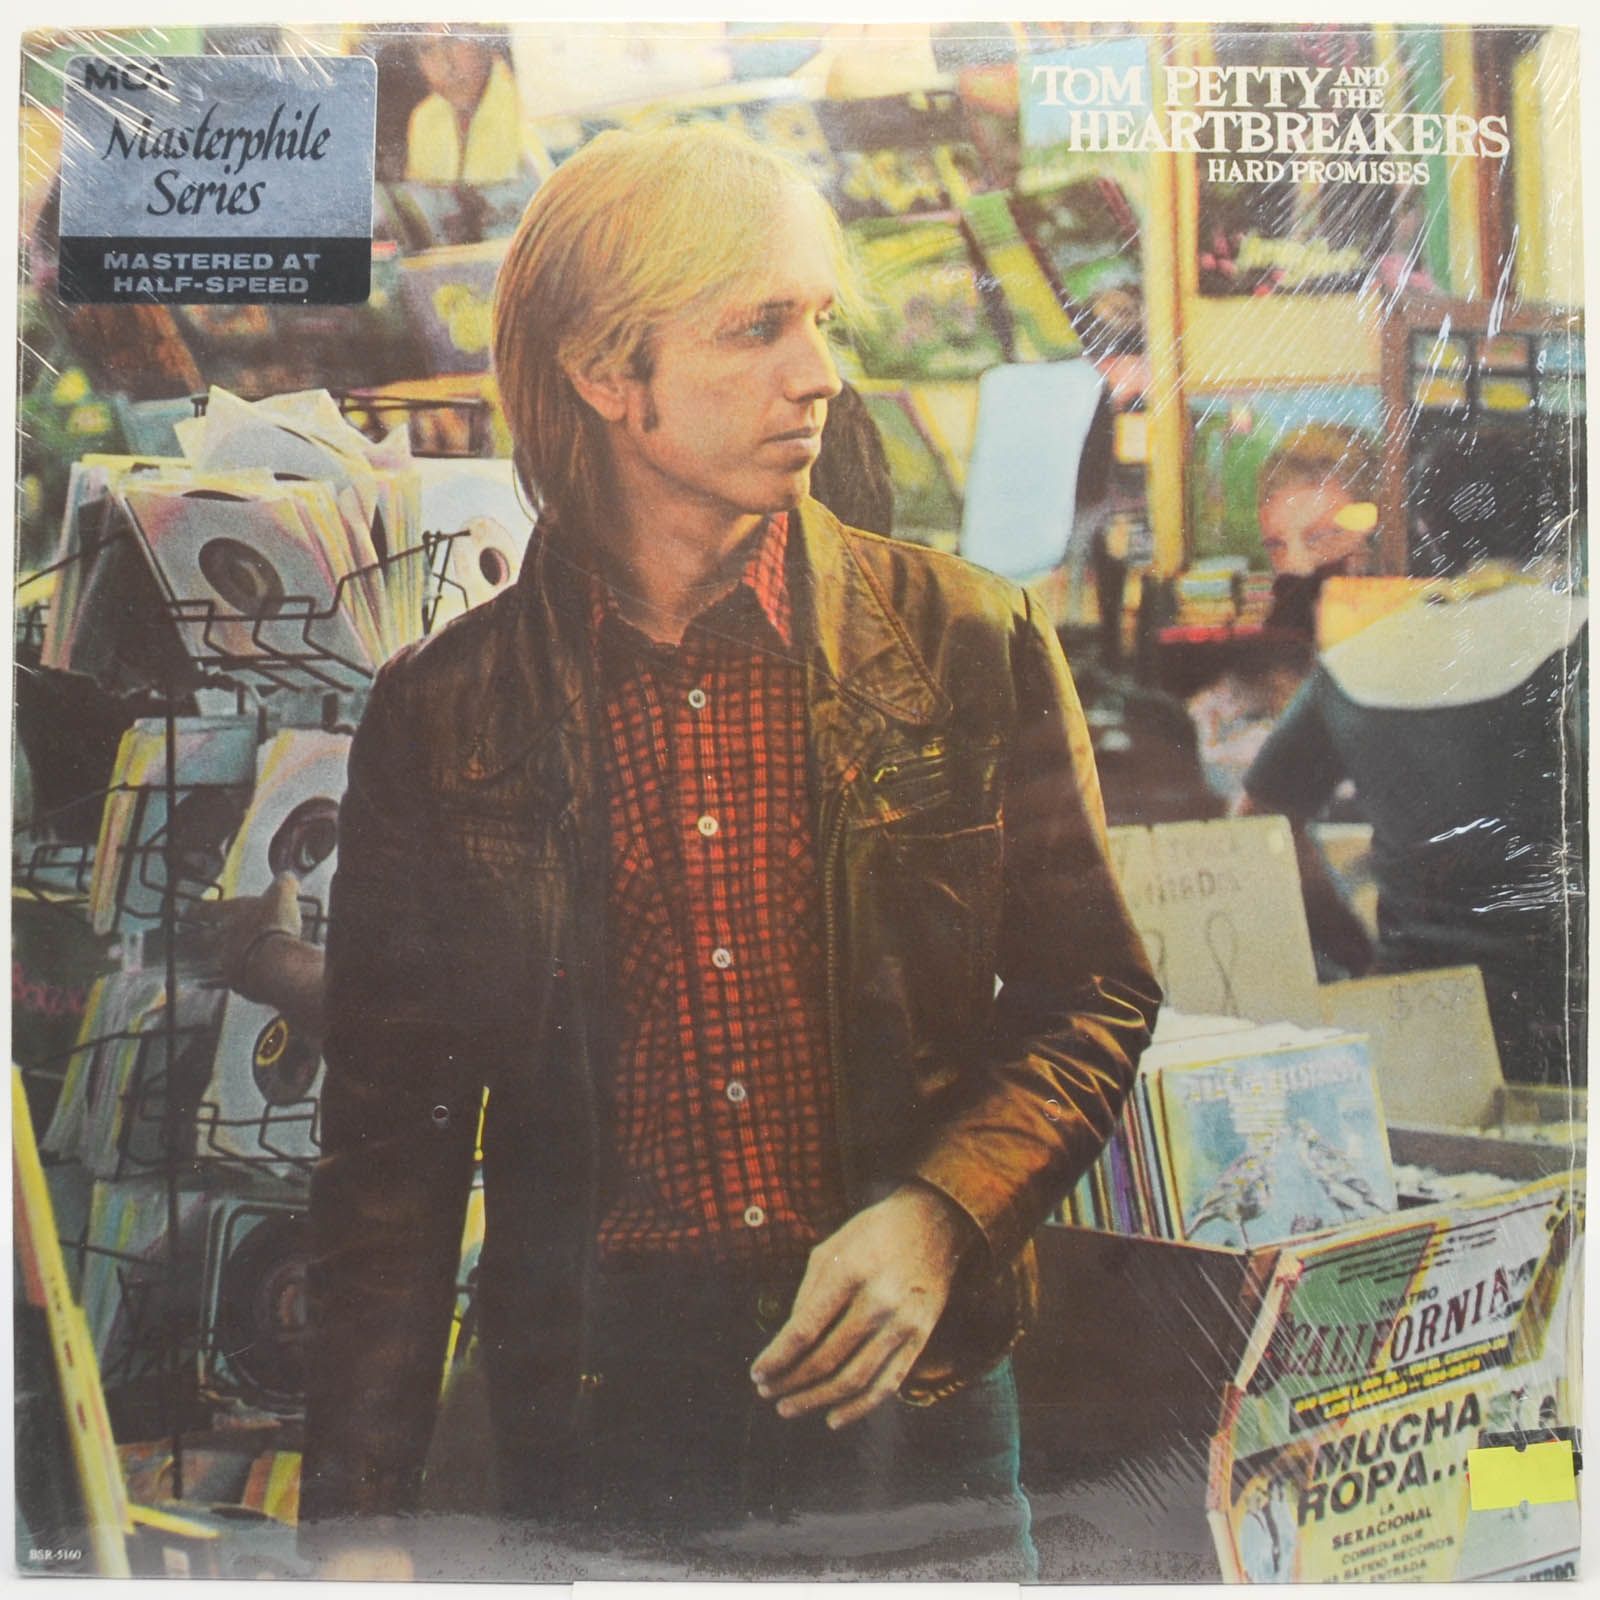 Tom Petty And The Heartbreakers — Hard Promises, 1981